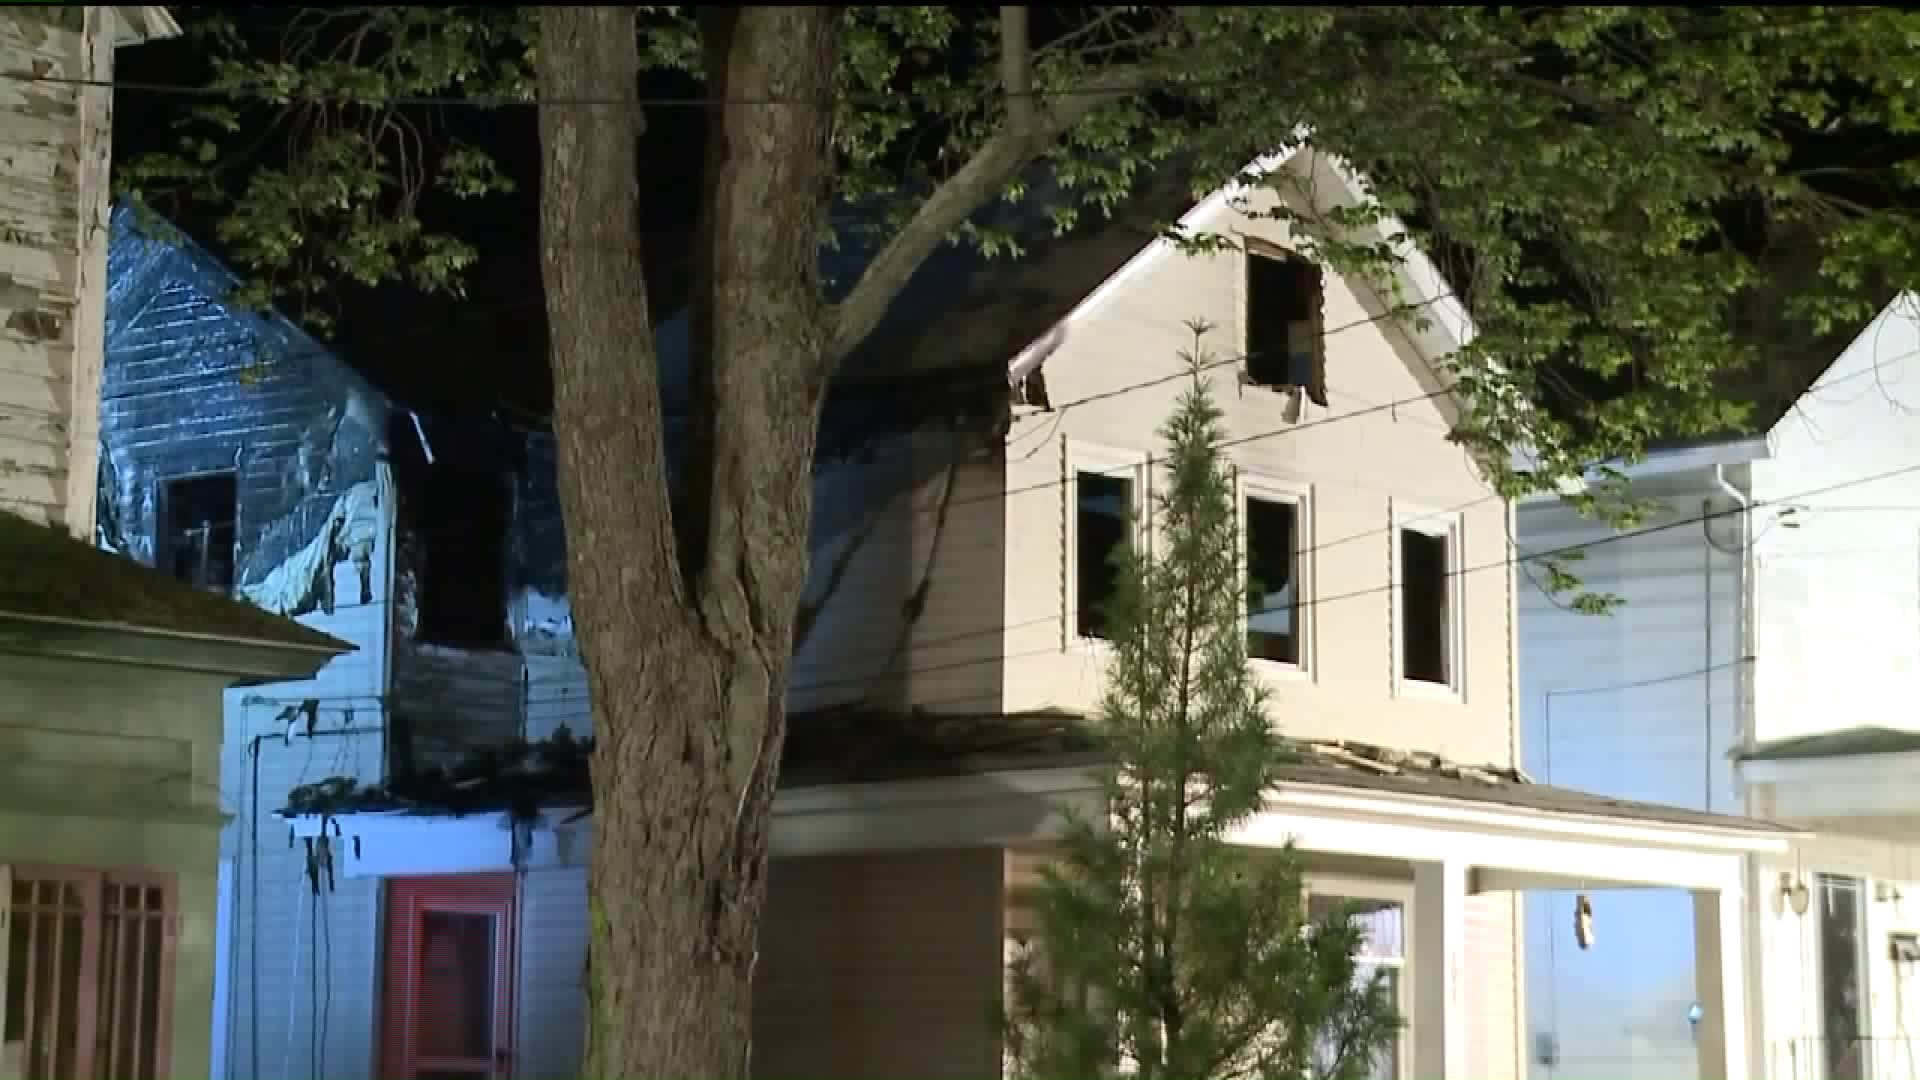 Faulty Power Strip Blamed for Carbondale Fire